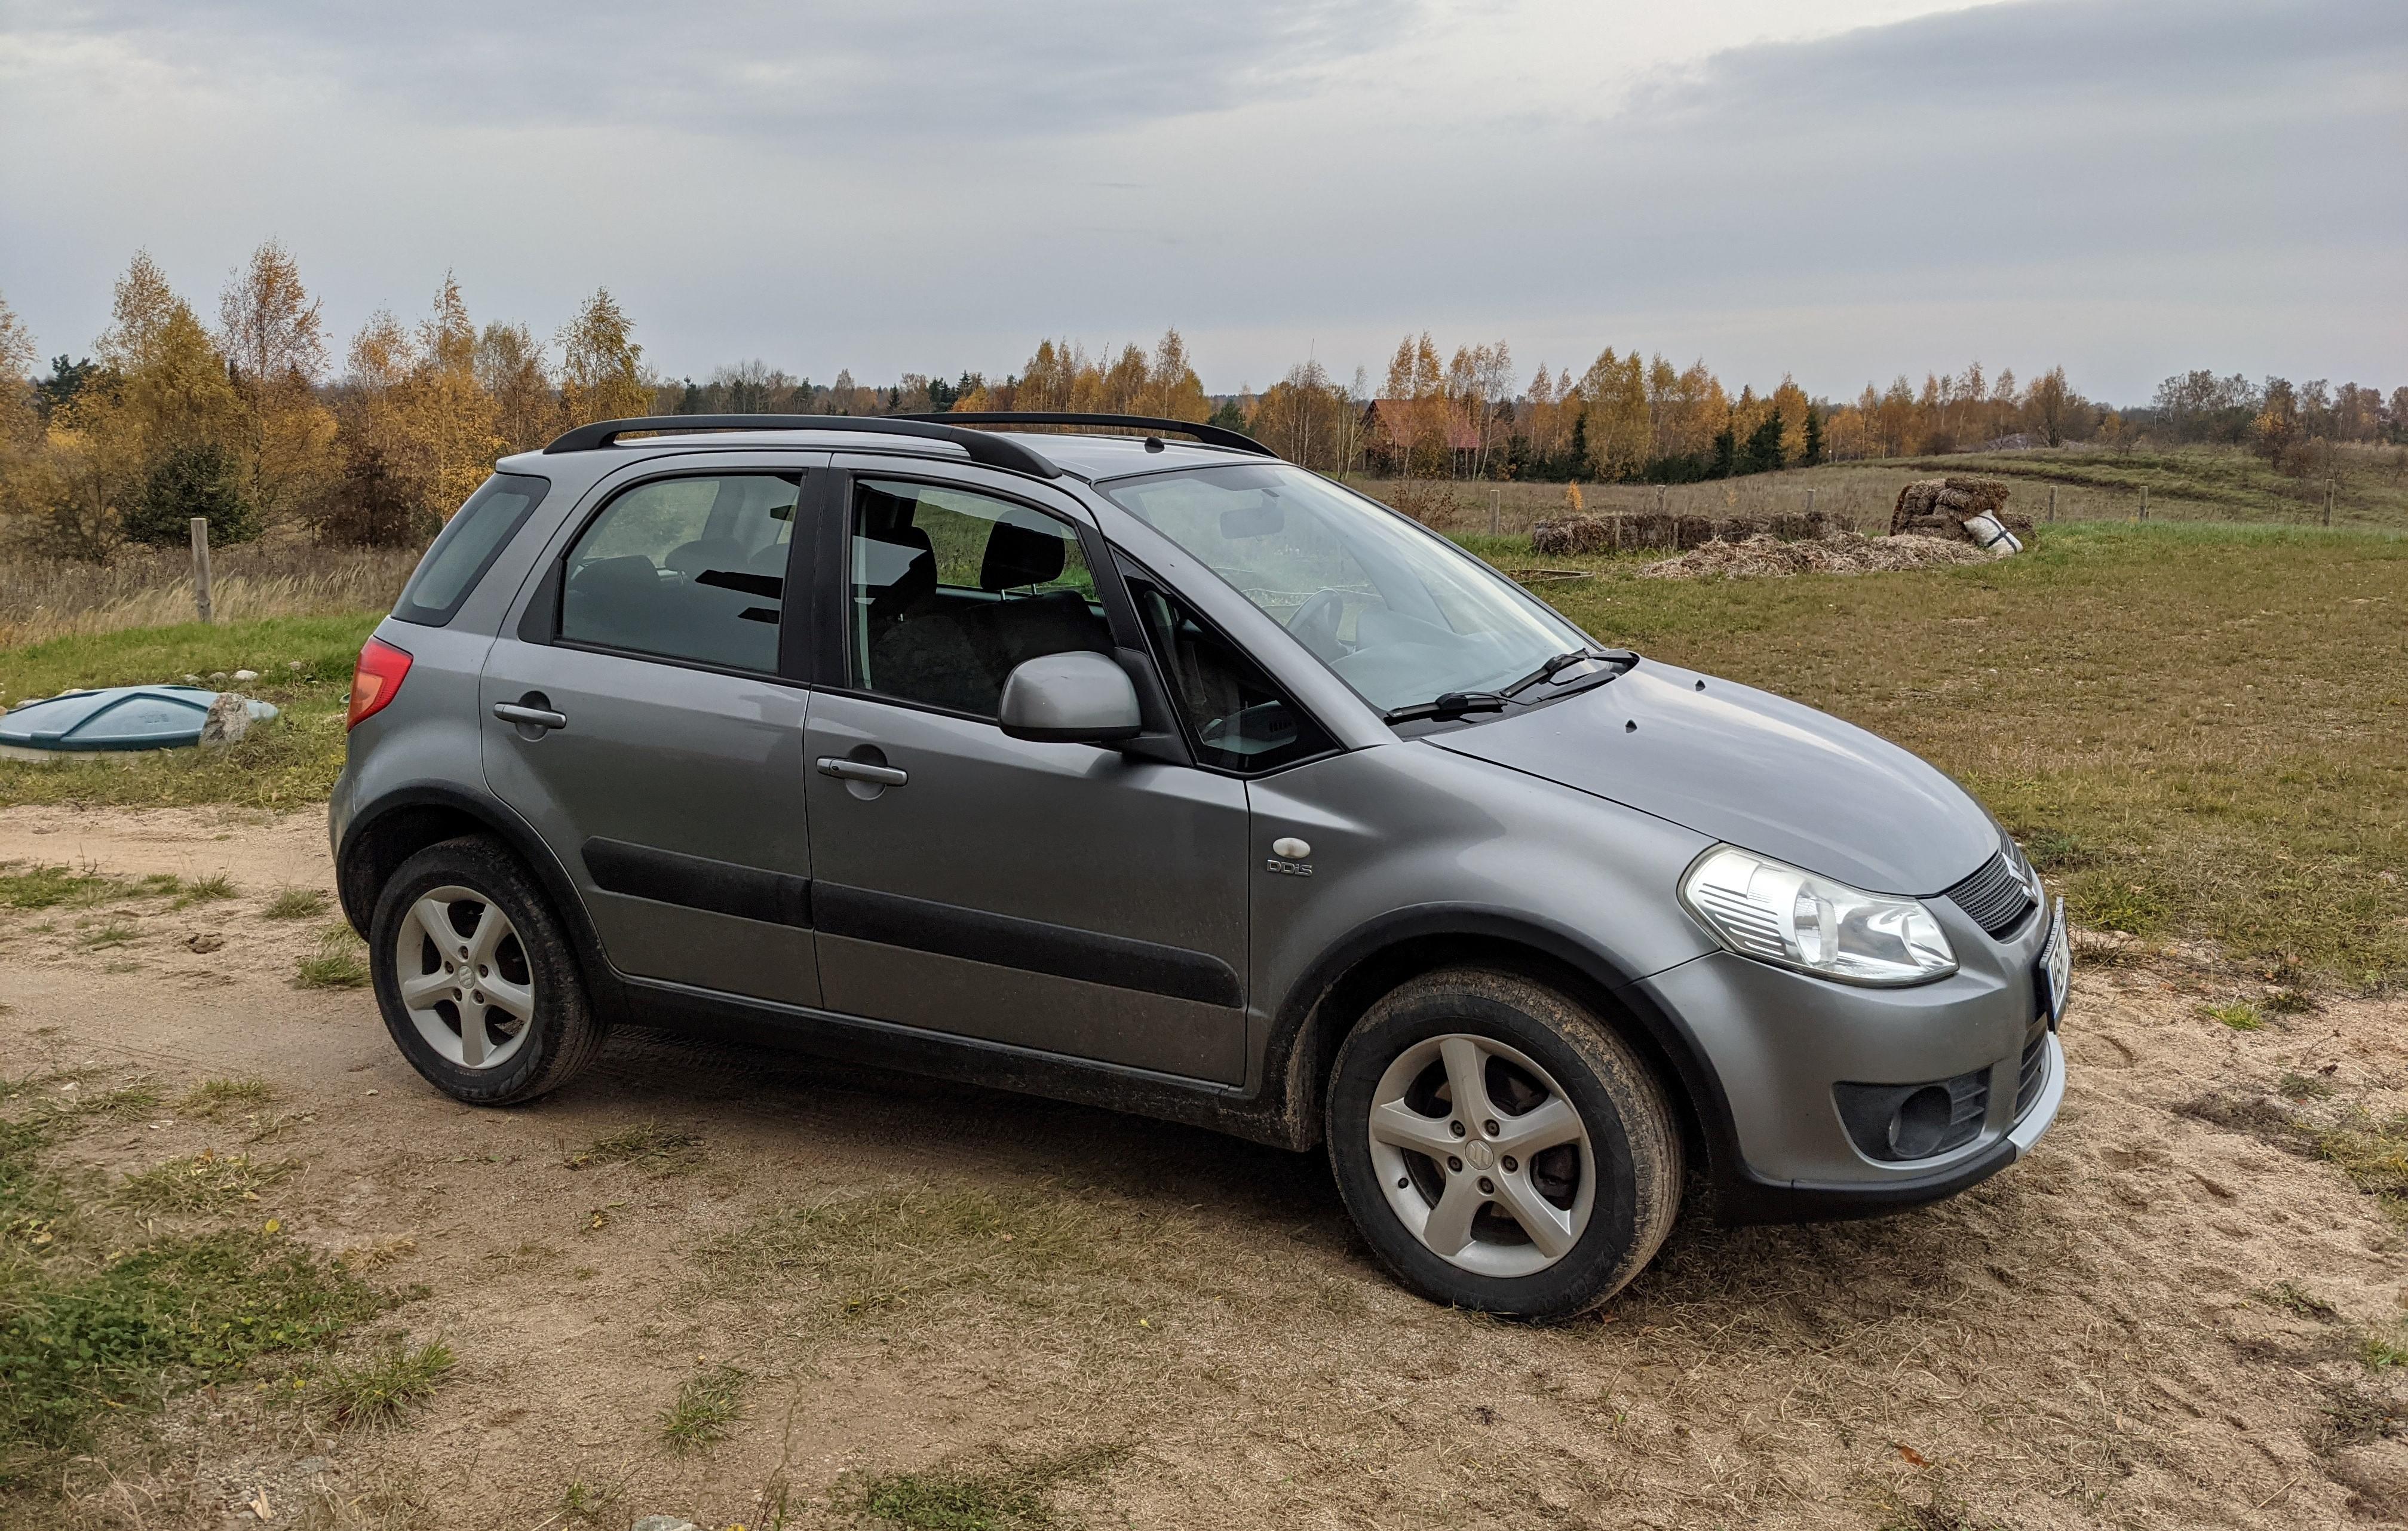 Suzuki SX4 AWD. The official car of "I'm cheap, European and I live 300  meters down a dirt track " : r/regularcarreviews